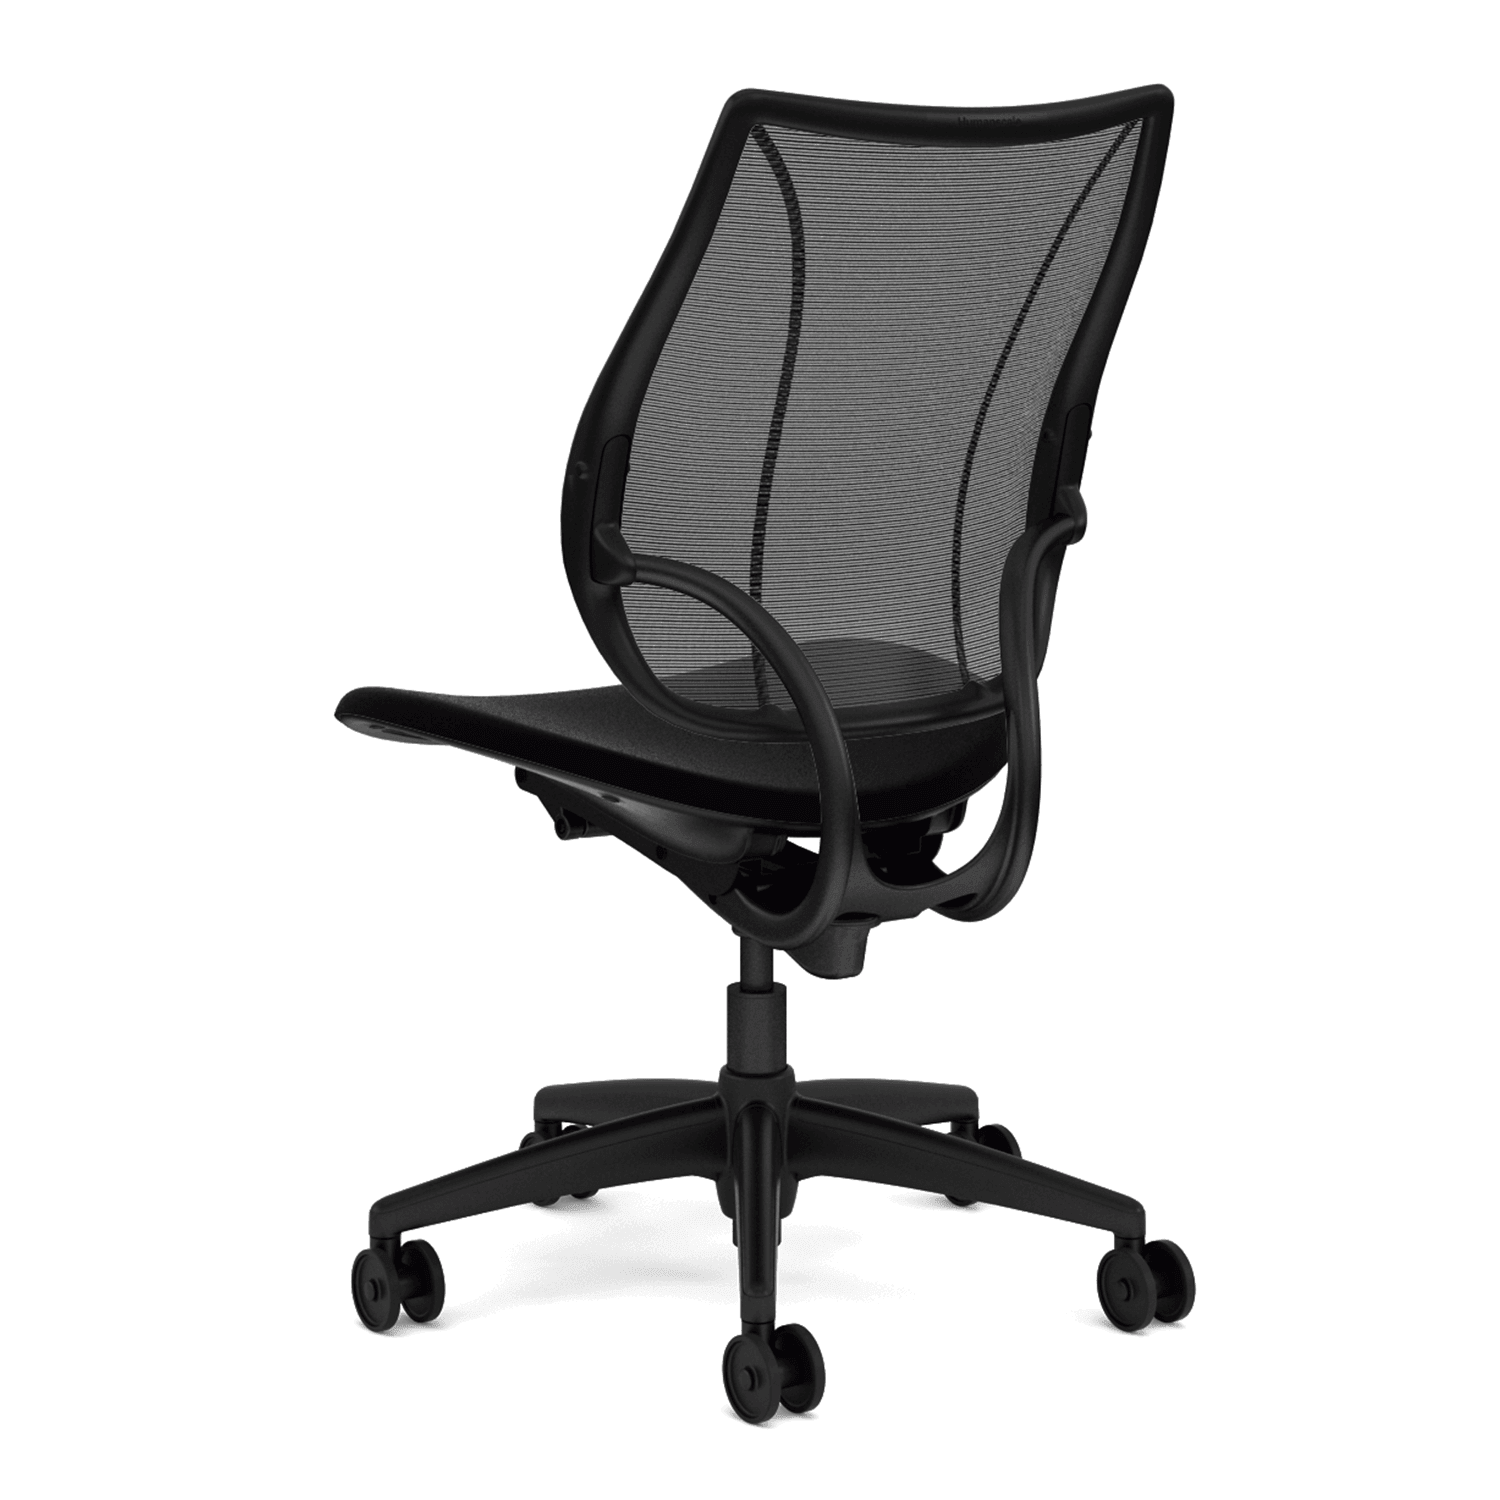 Liberty Ergonomic Task Chair without Arms - Office Furniture Company 